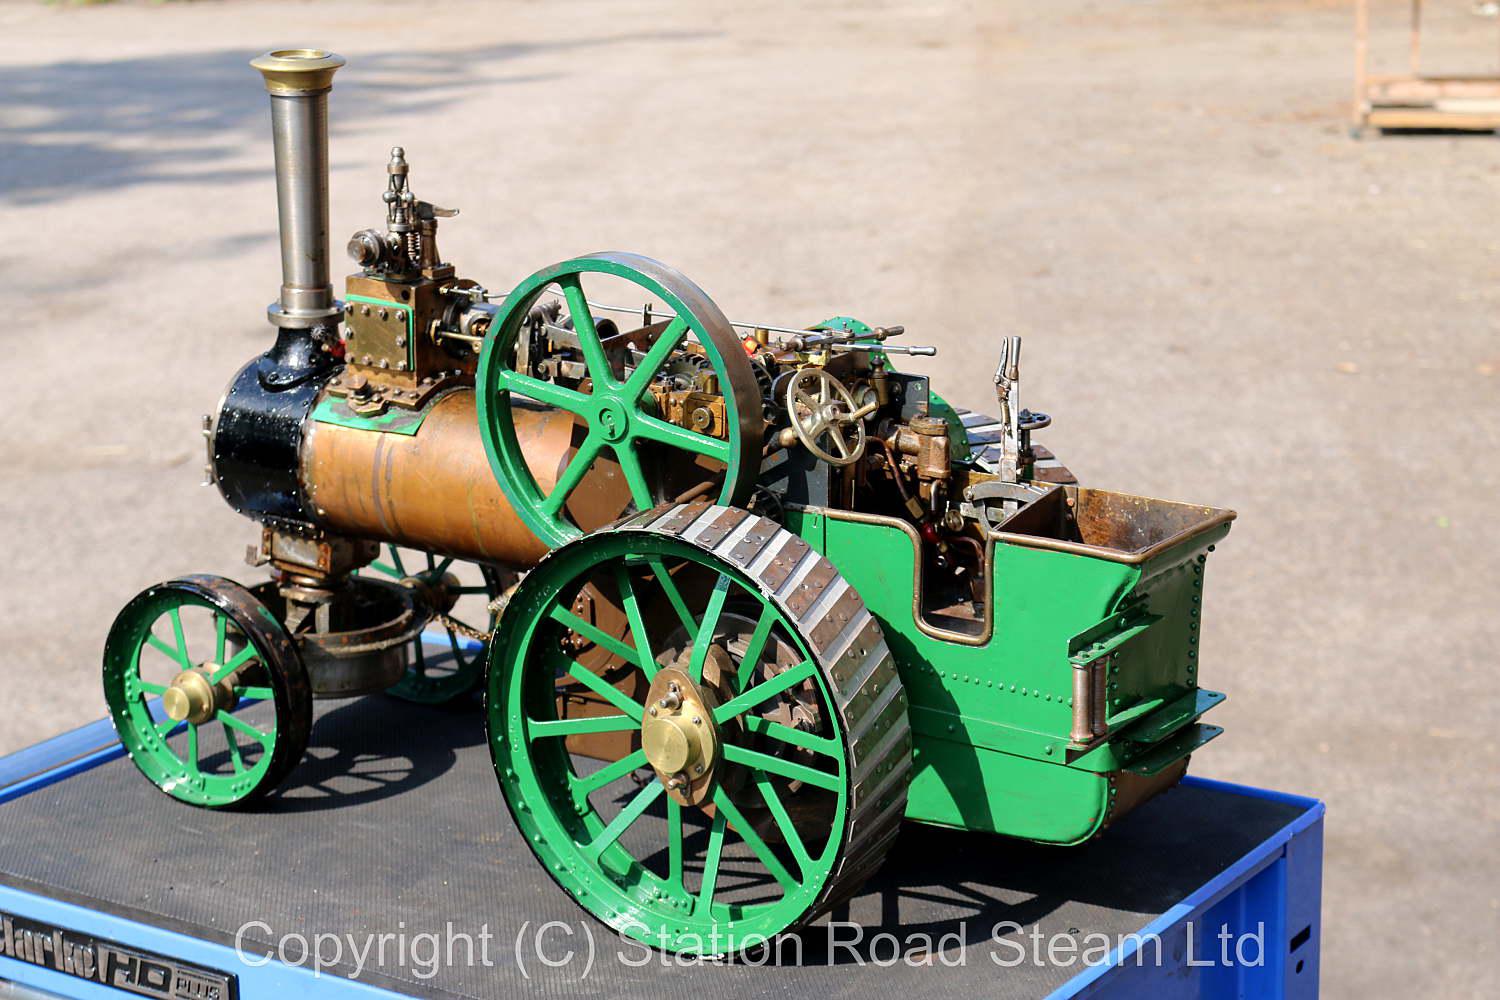 1 1/2 inch scale Allchin traction engine